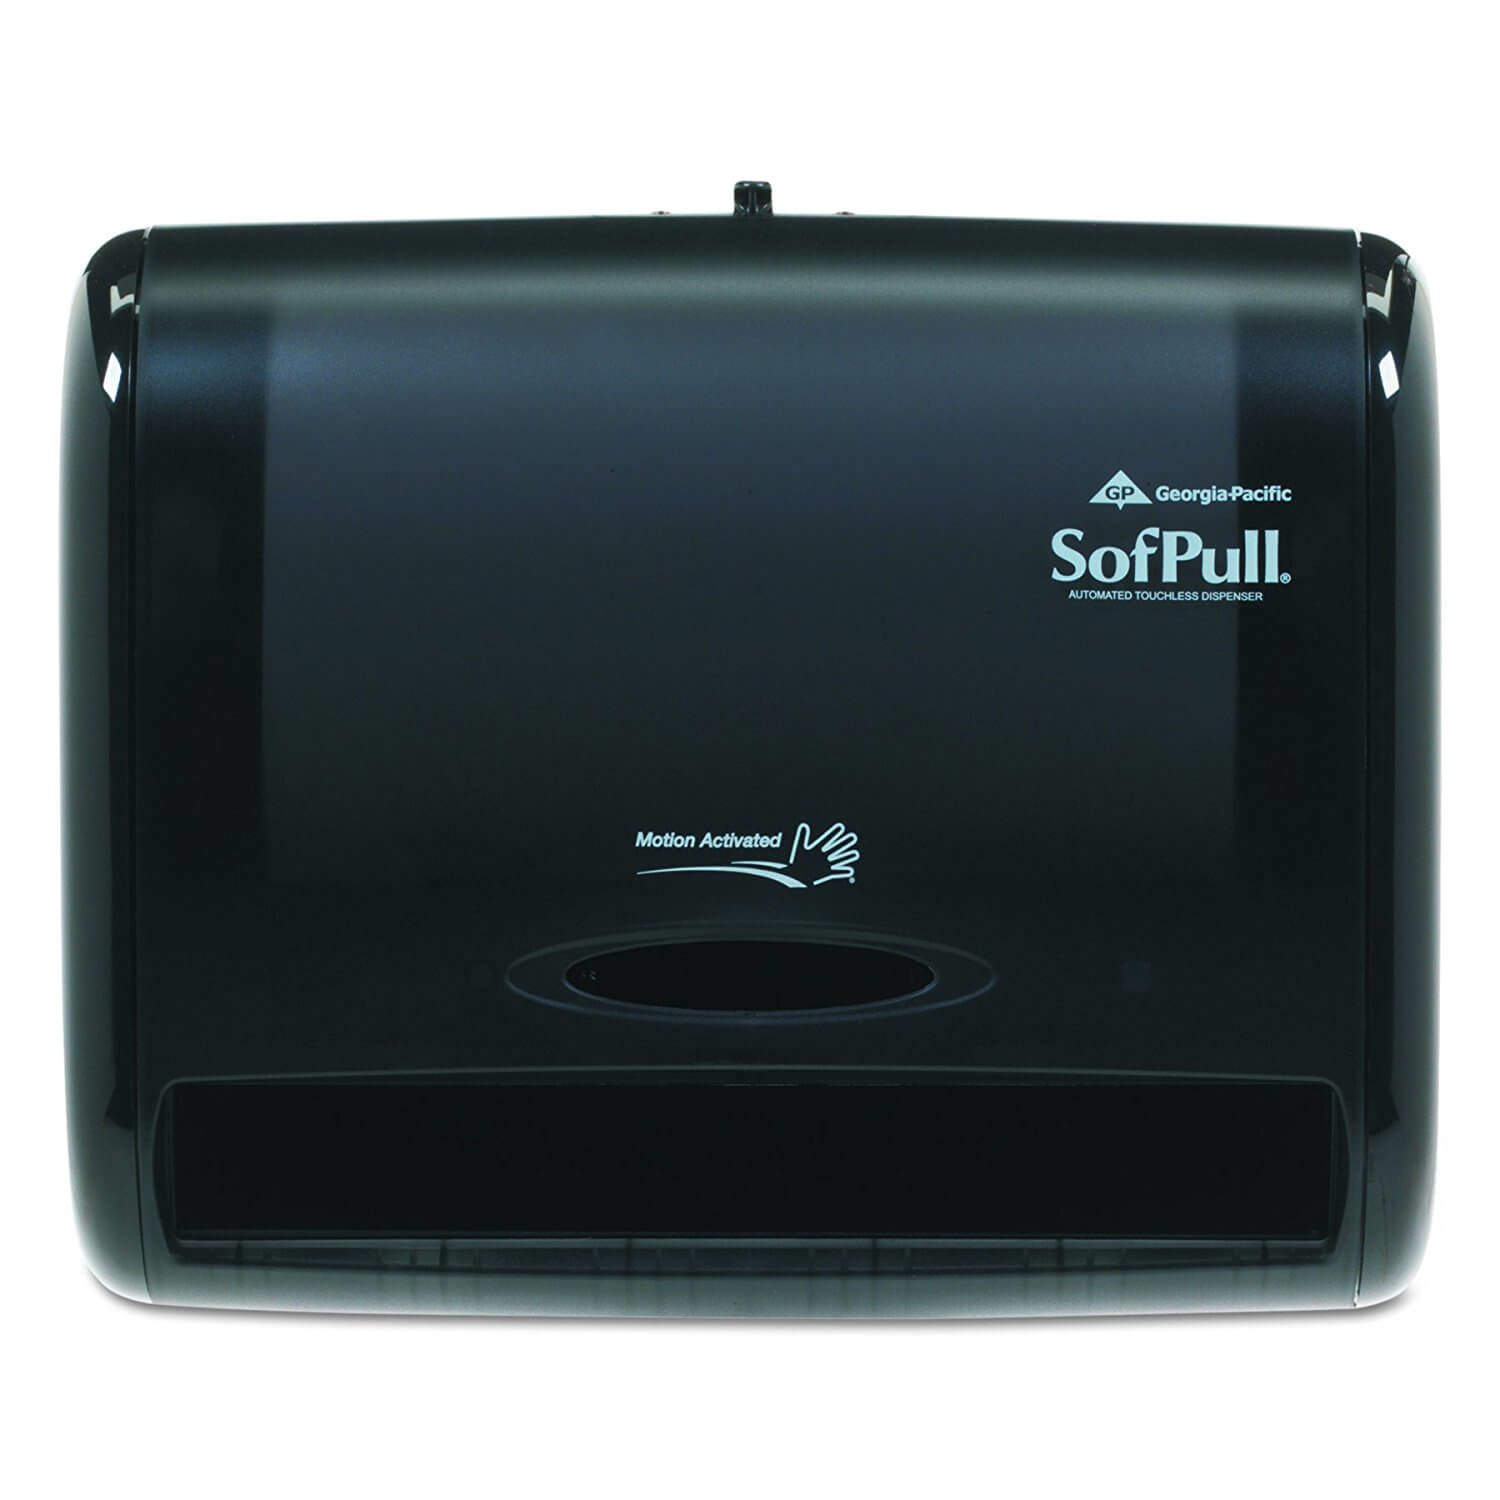 Georgia-Pacific 58470 SofPull Automatic Touchless Paper Towel Dispenser